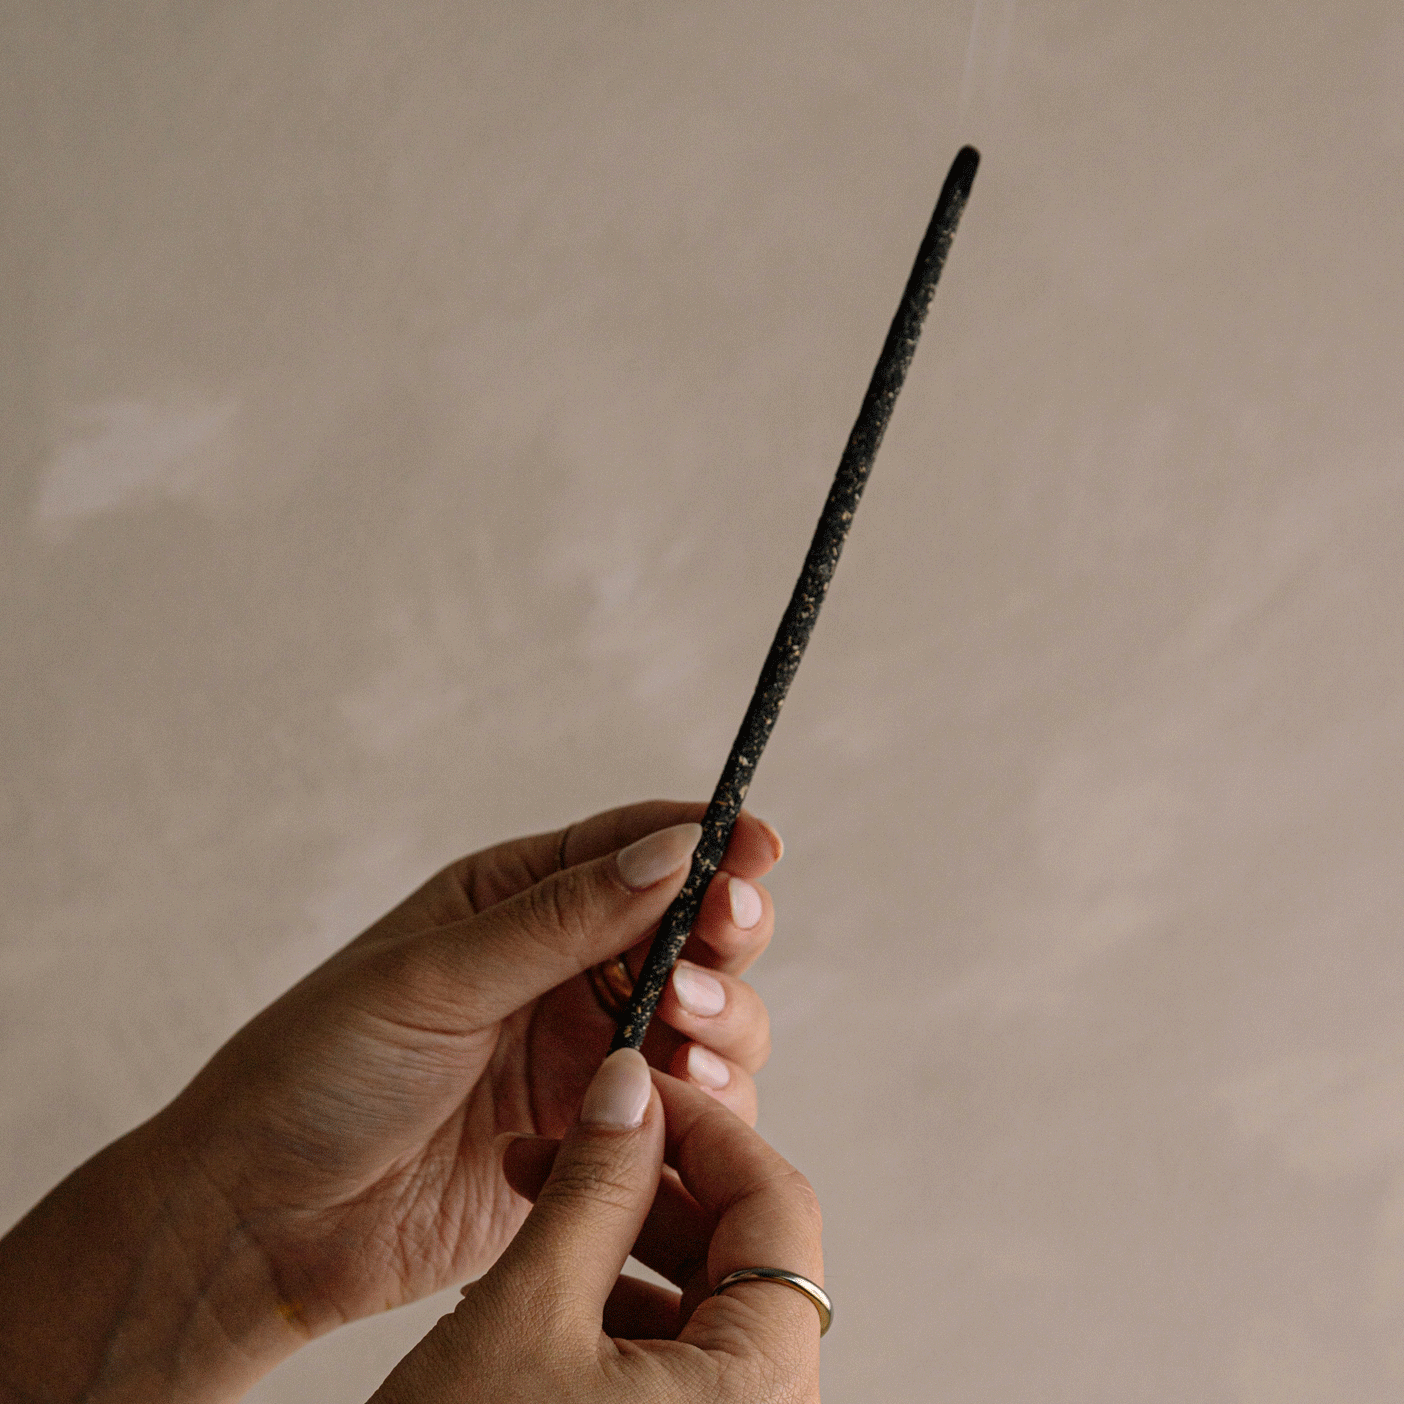 A gif holding while burning incense stick.